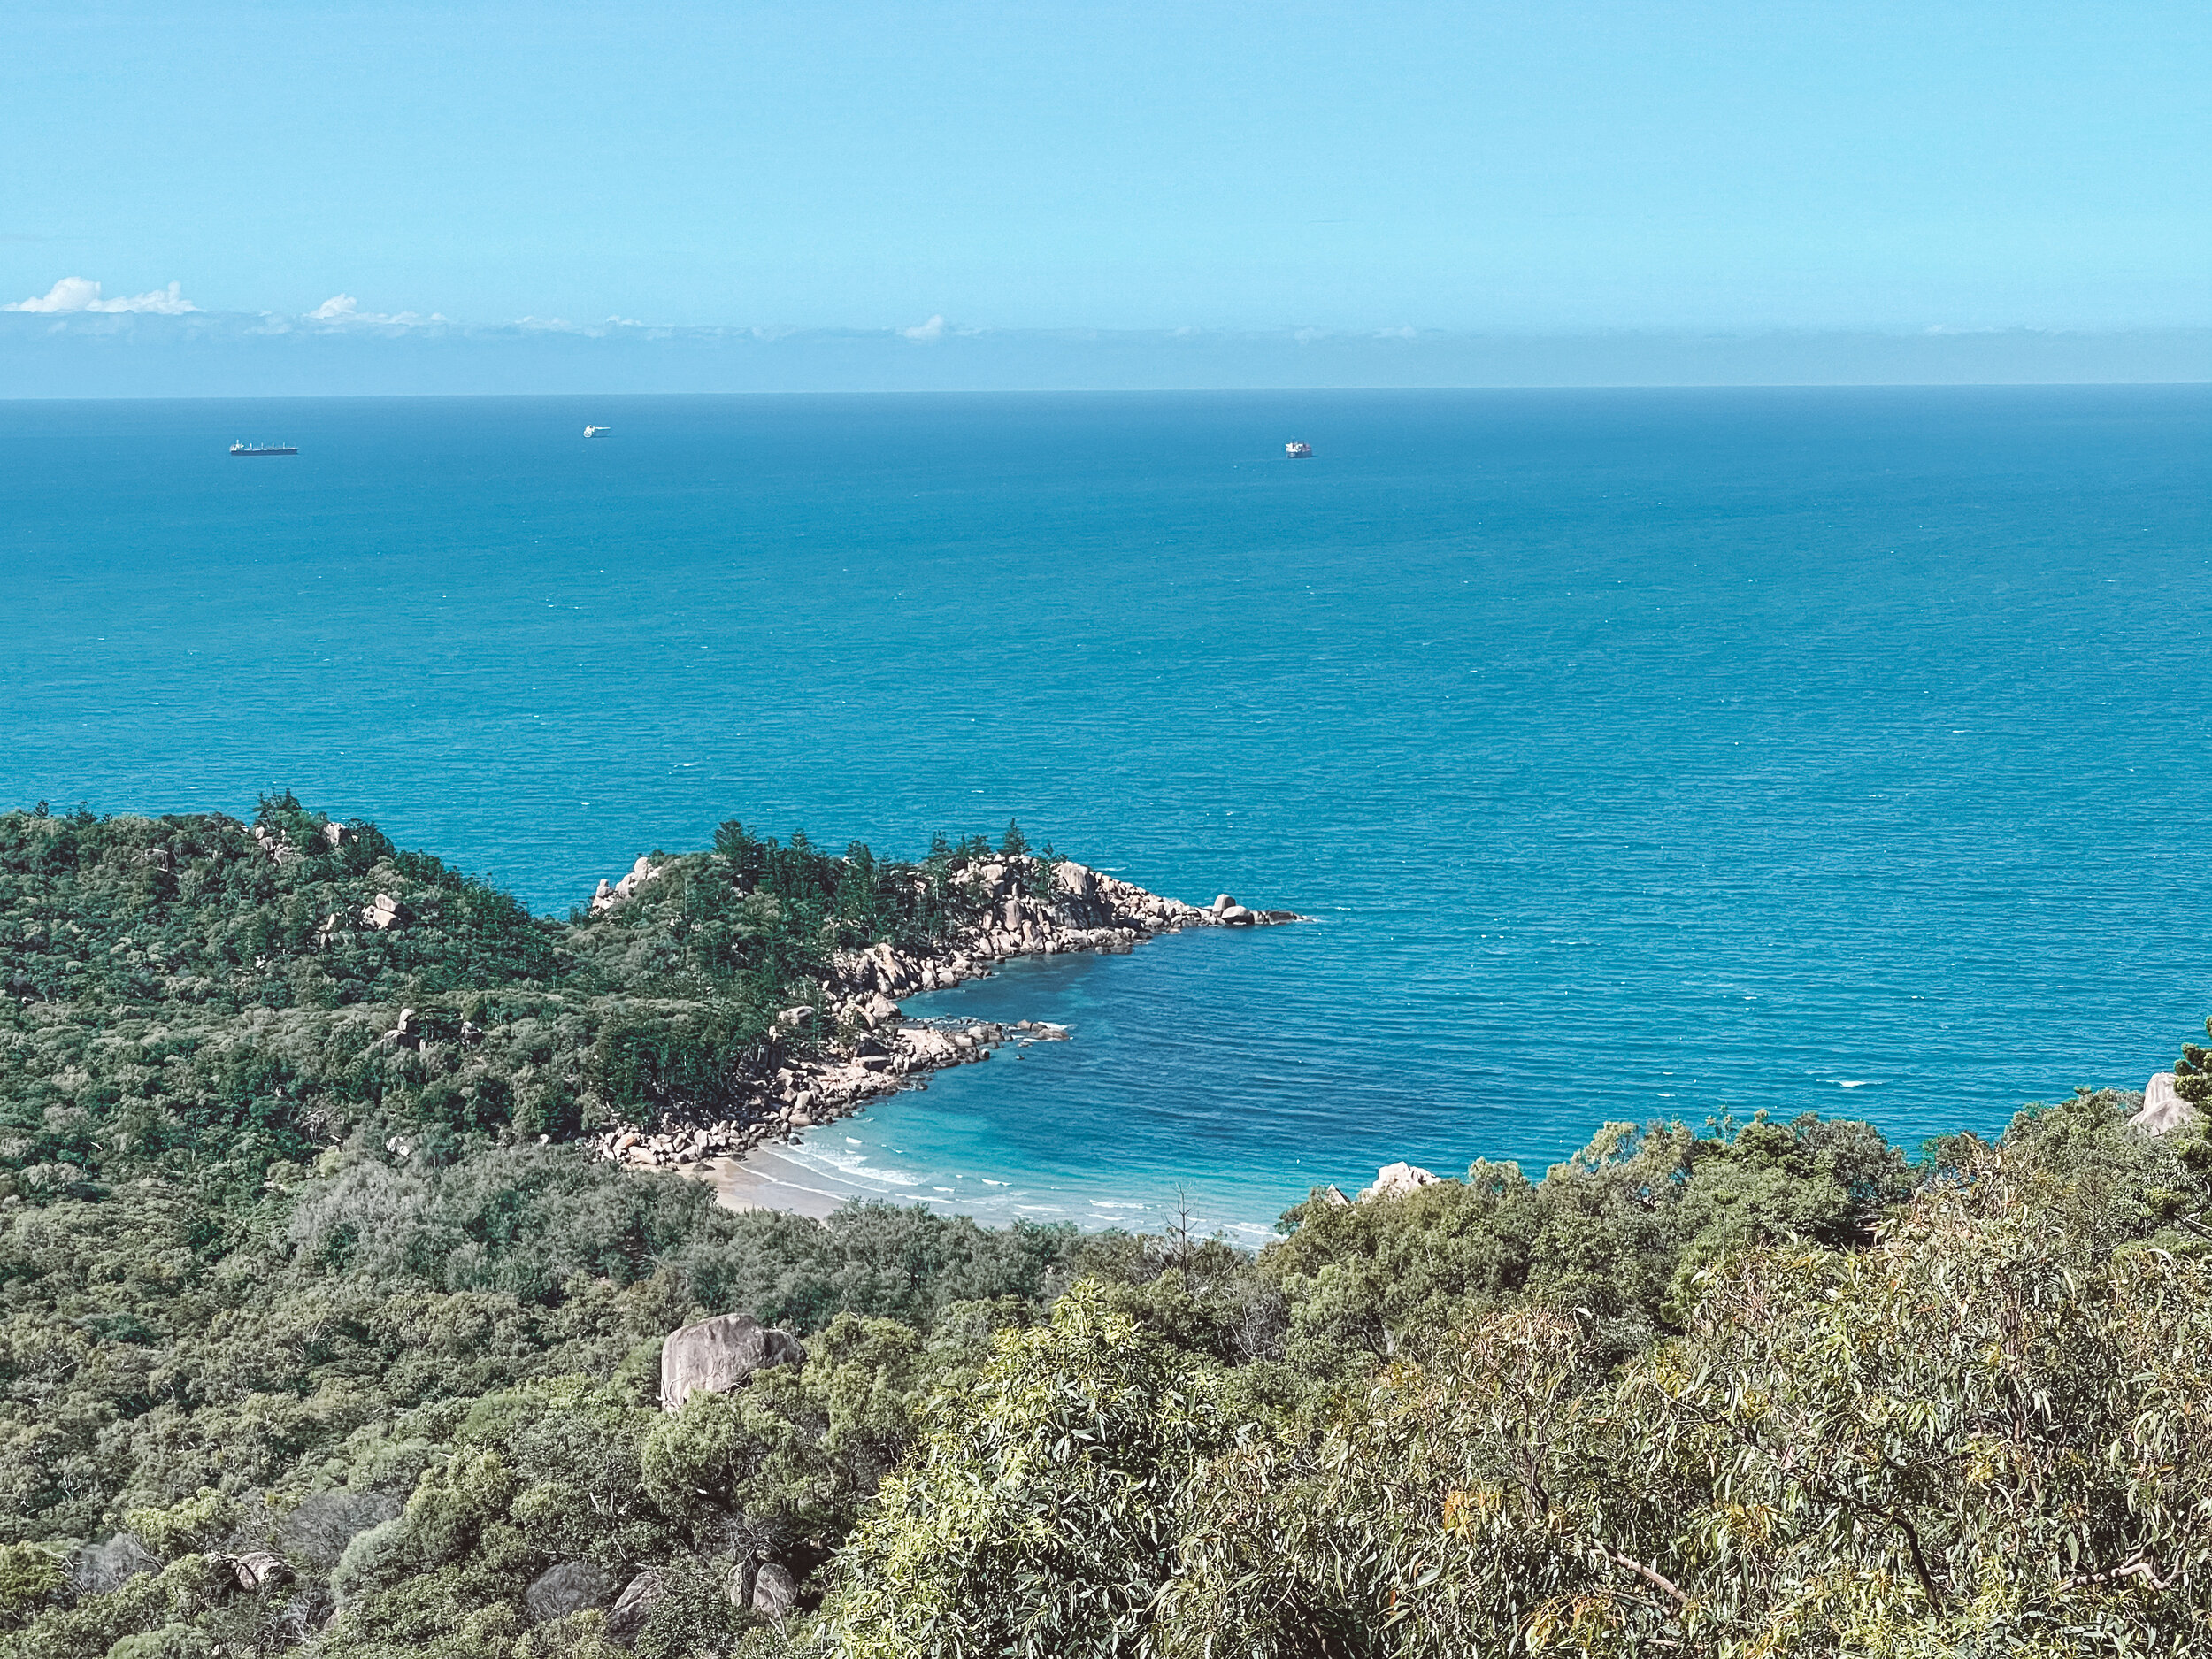 View from the Forts - Magnetic Island (Maggie) - Townsville - Tropical North Queensland (QLD) - Australia